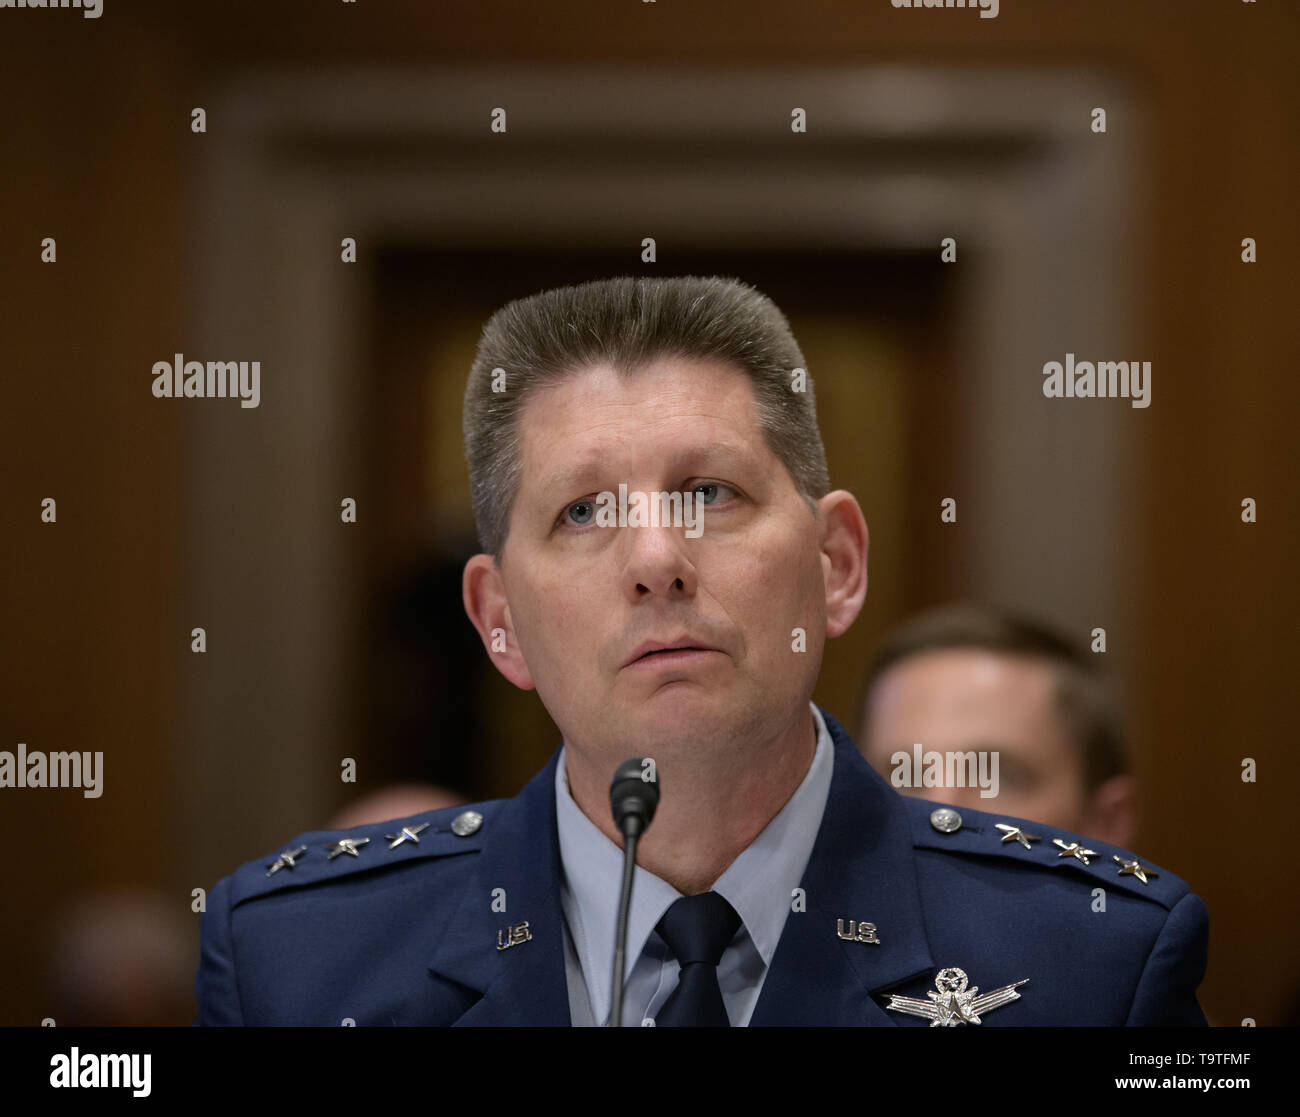 Lt. Gen. David D. Thompson, Vice Commander, Space Command, United States Air Force, testifies before the Aviation and Space Subcommittee of the Senate Commerce, Science, and Transportation Committee during a hearing on The Emerging Space Environment: Operational, Technical, and Policy Challenges at the Dirksen Senate Office Building May 14, 2019 in Washington, DC. Stock Photo